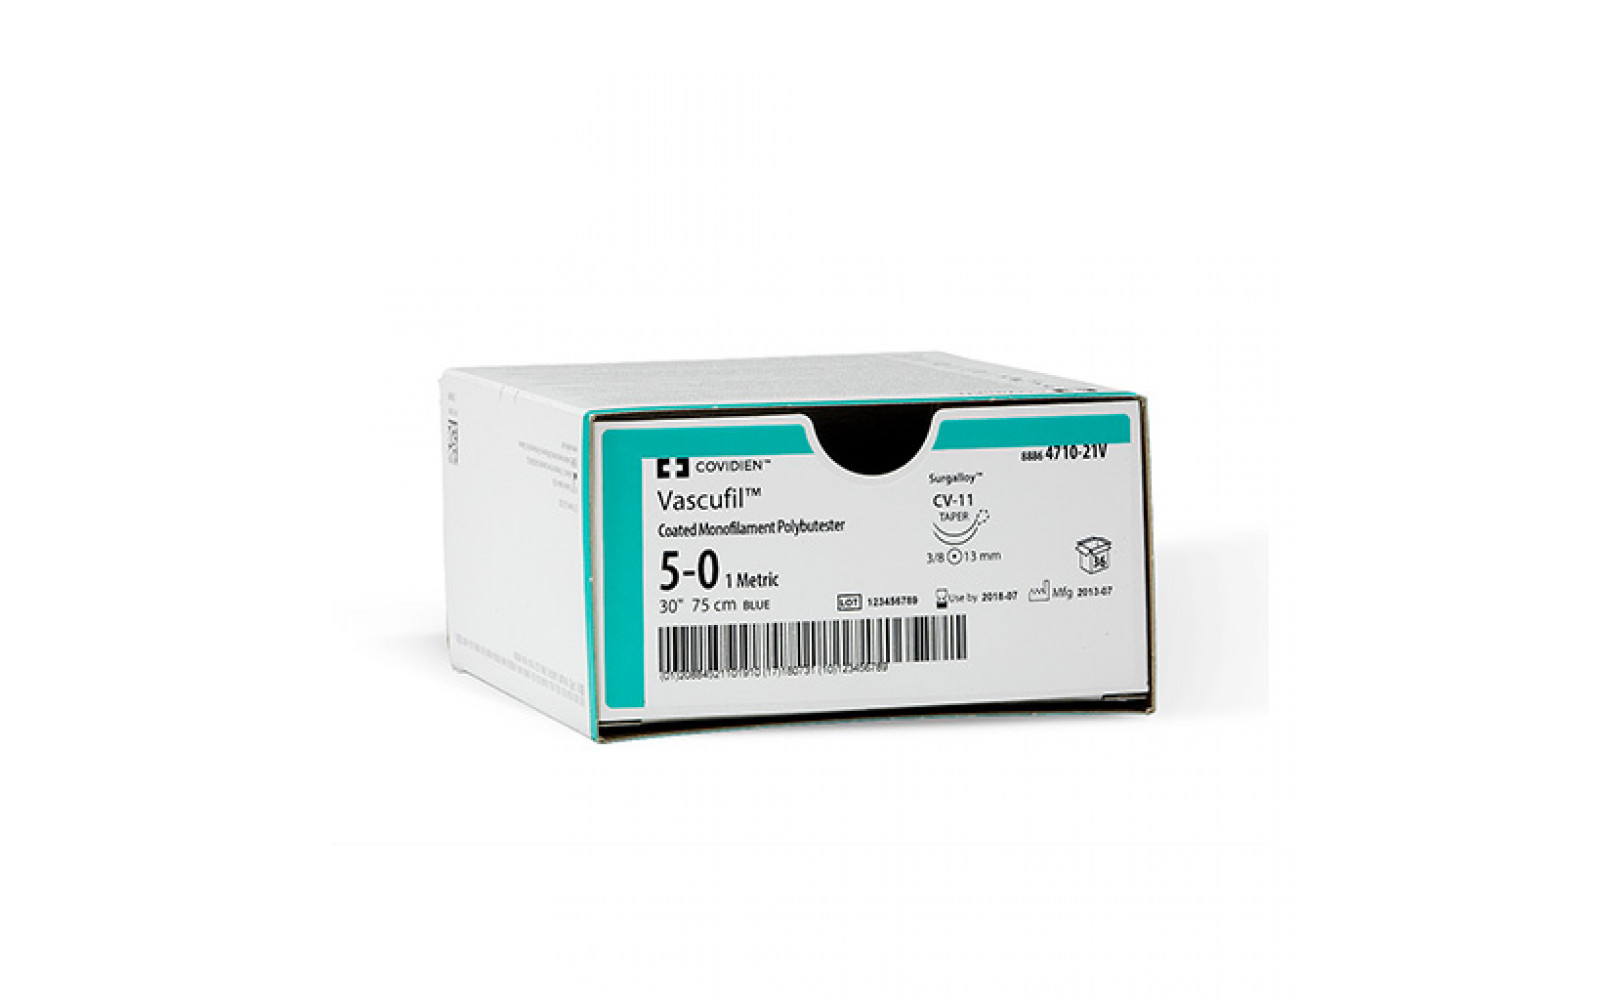 Sofsilk™ Coated Braided Silk Non-Absorbable Sutures (Medtronic)